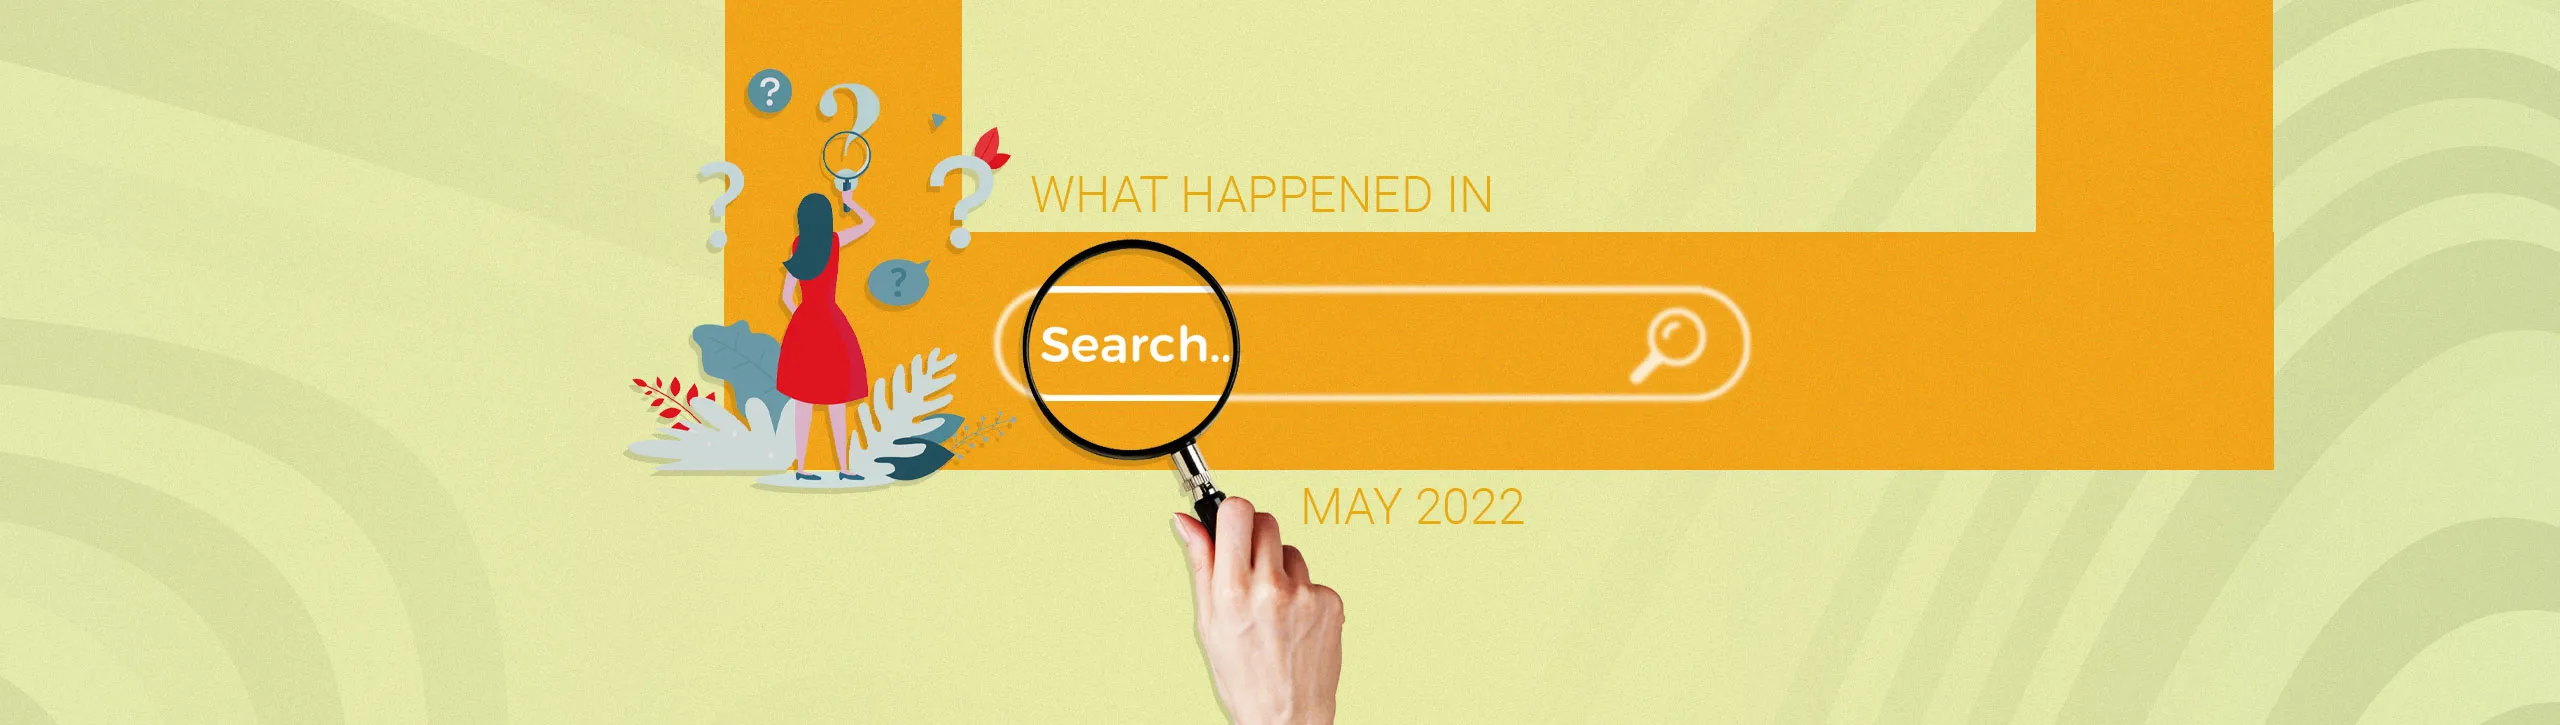 Google Search Updates – May ‘22 Changes 